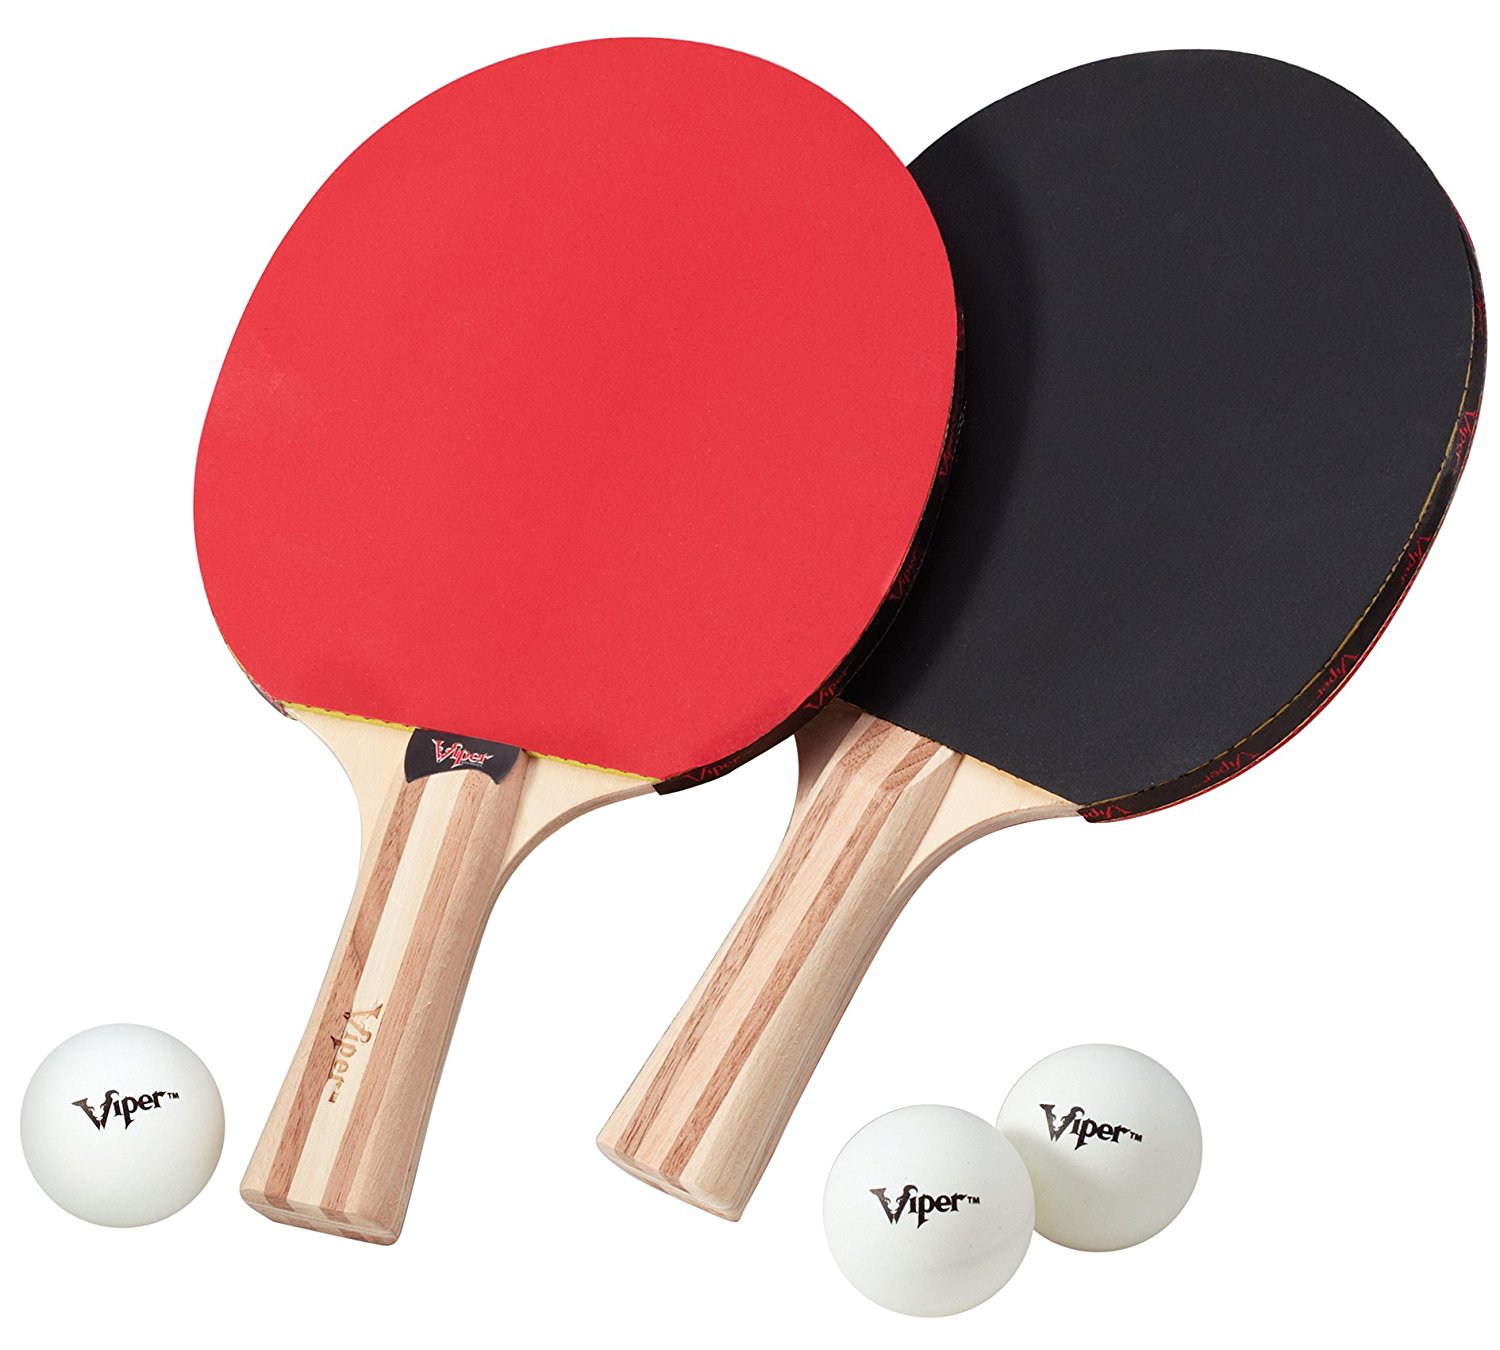 Amazon.com : Viper Table Tennis Accessory Set, 2 Rackets/Paddles and ...